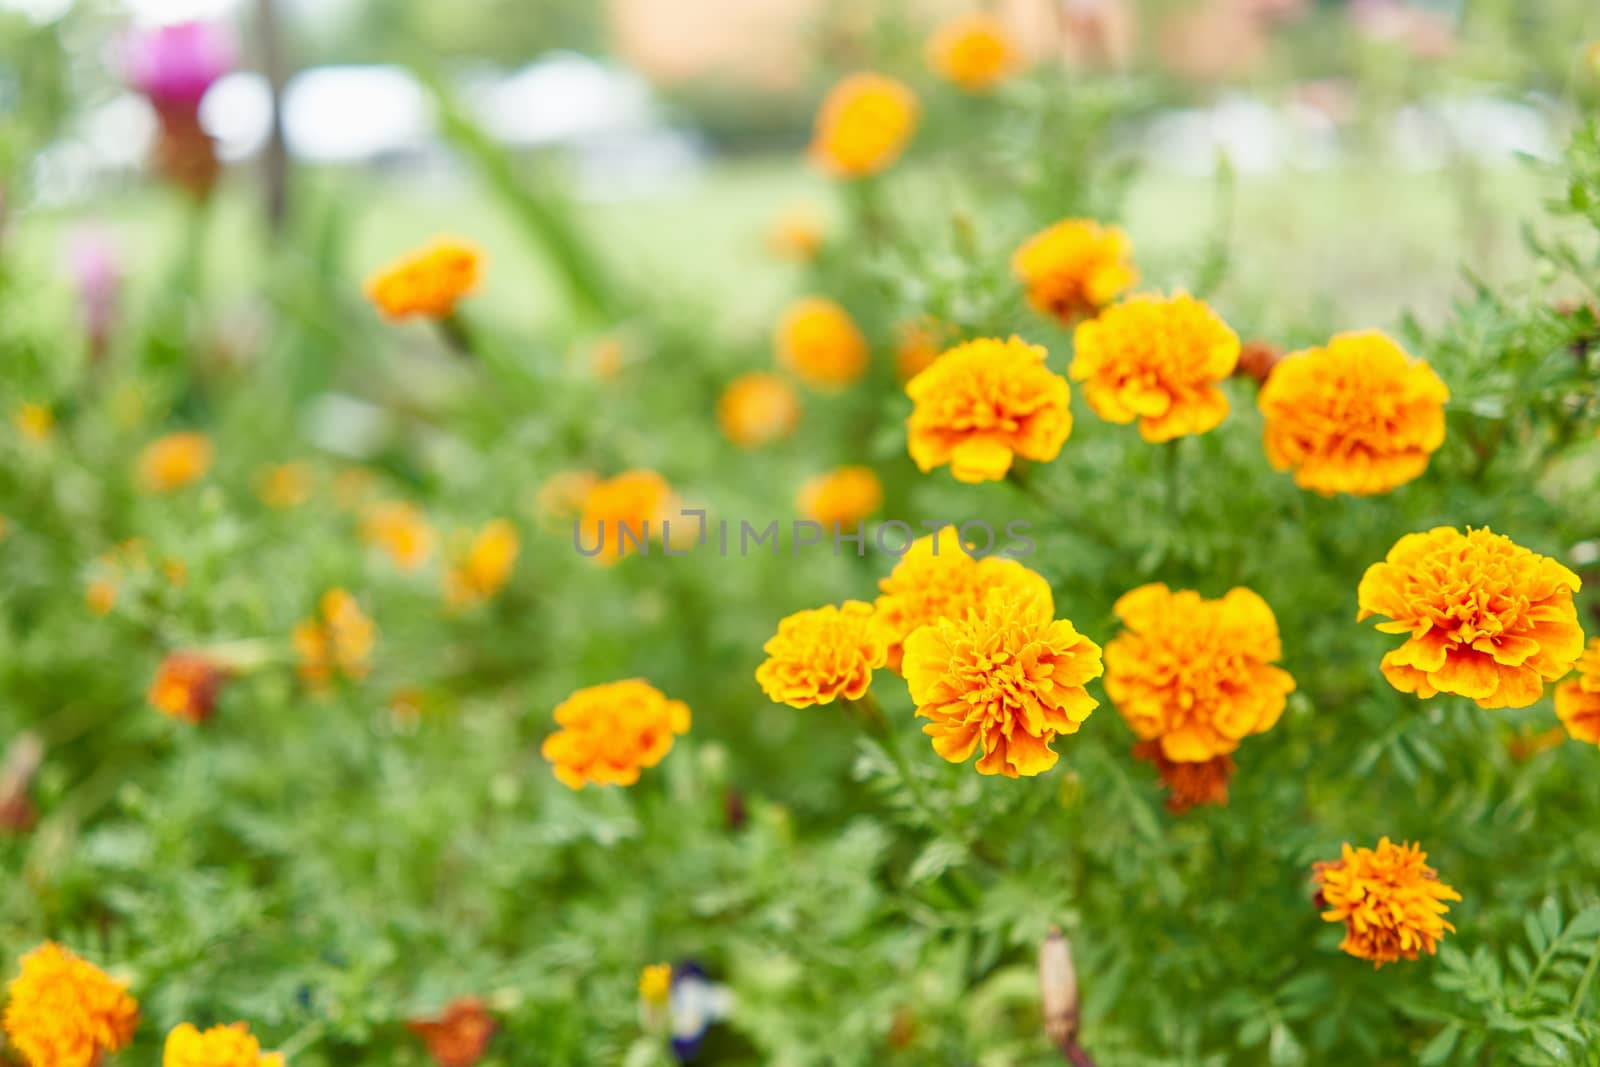 Tagetes erecta or marigold have yellow and orange flower with green leaves in garden with copy space.